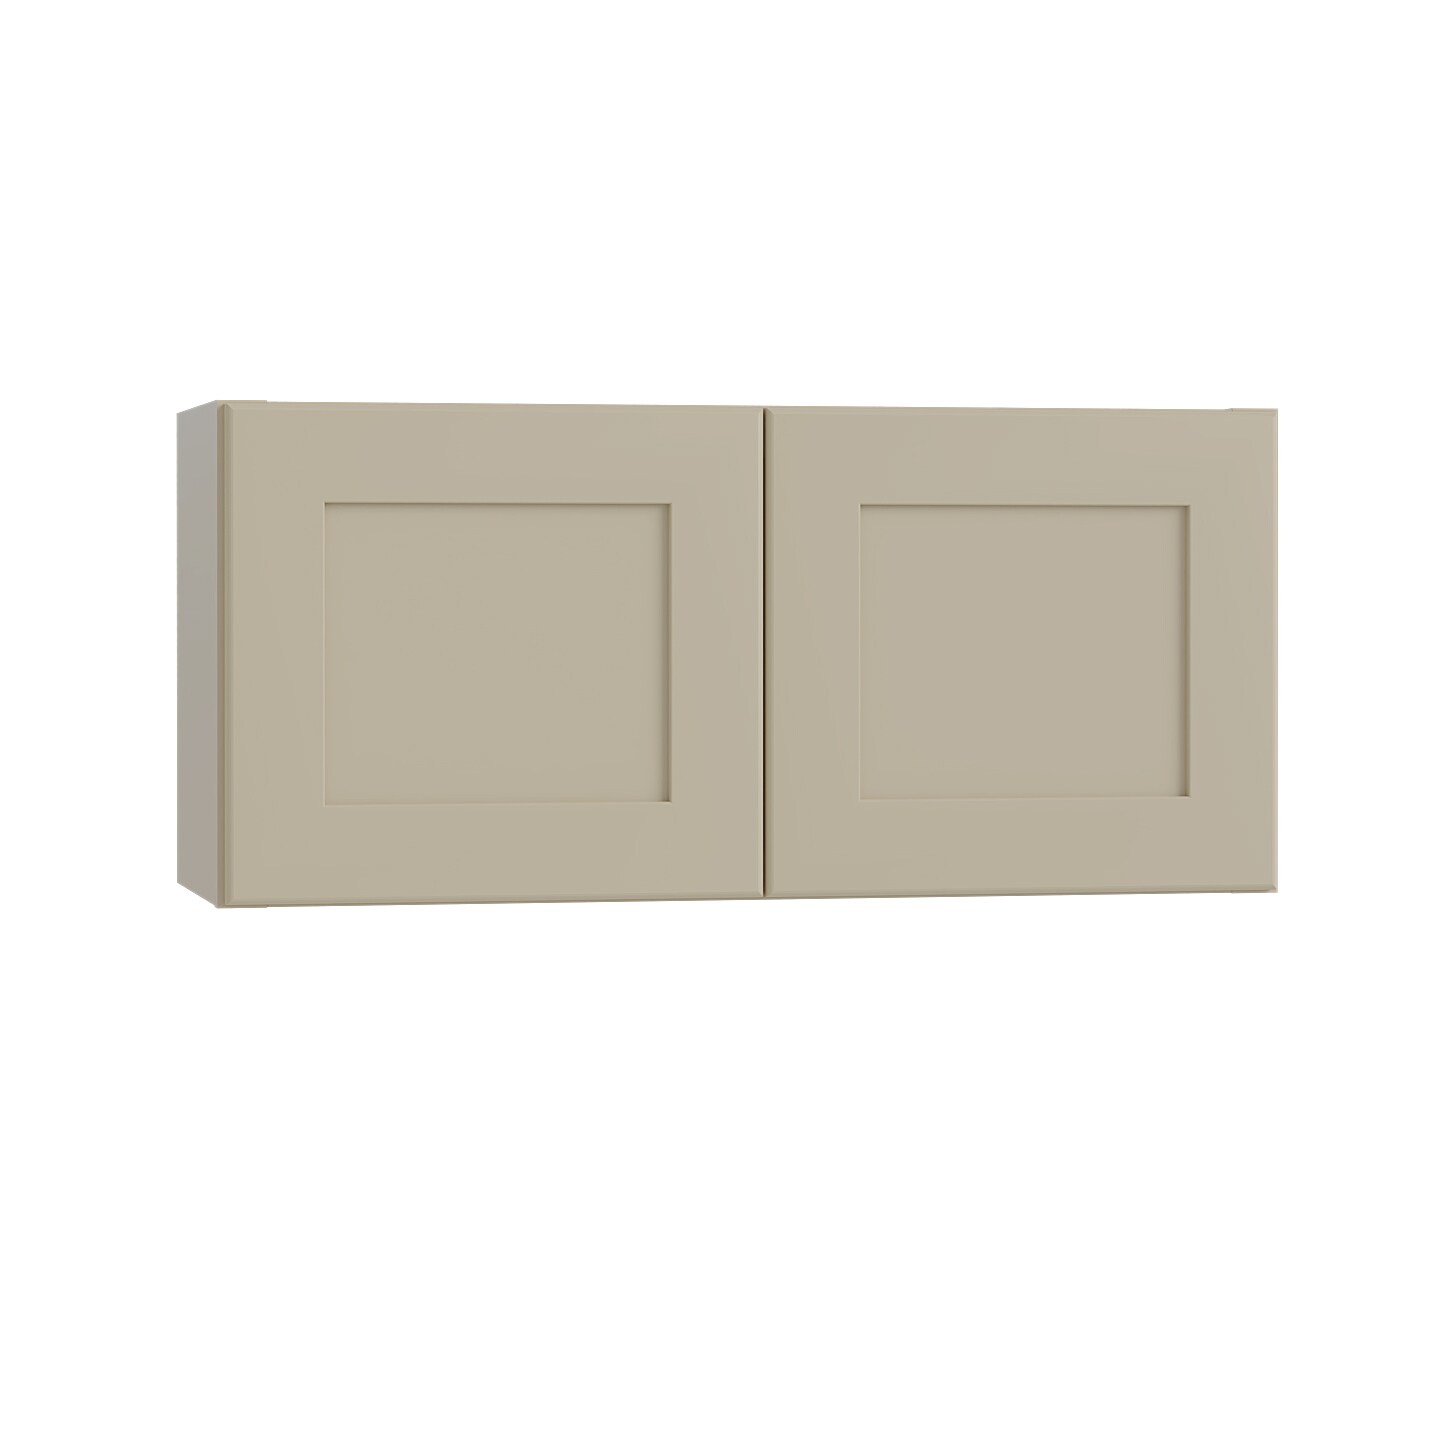 Luxxe Cabinetry 24-in W x 12-in H x 12-in D Norfolk Blended Cream Painted Door Wall Fully Assembled Semi-custom Cabinet in Off-White | W2412-NBC